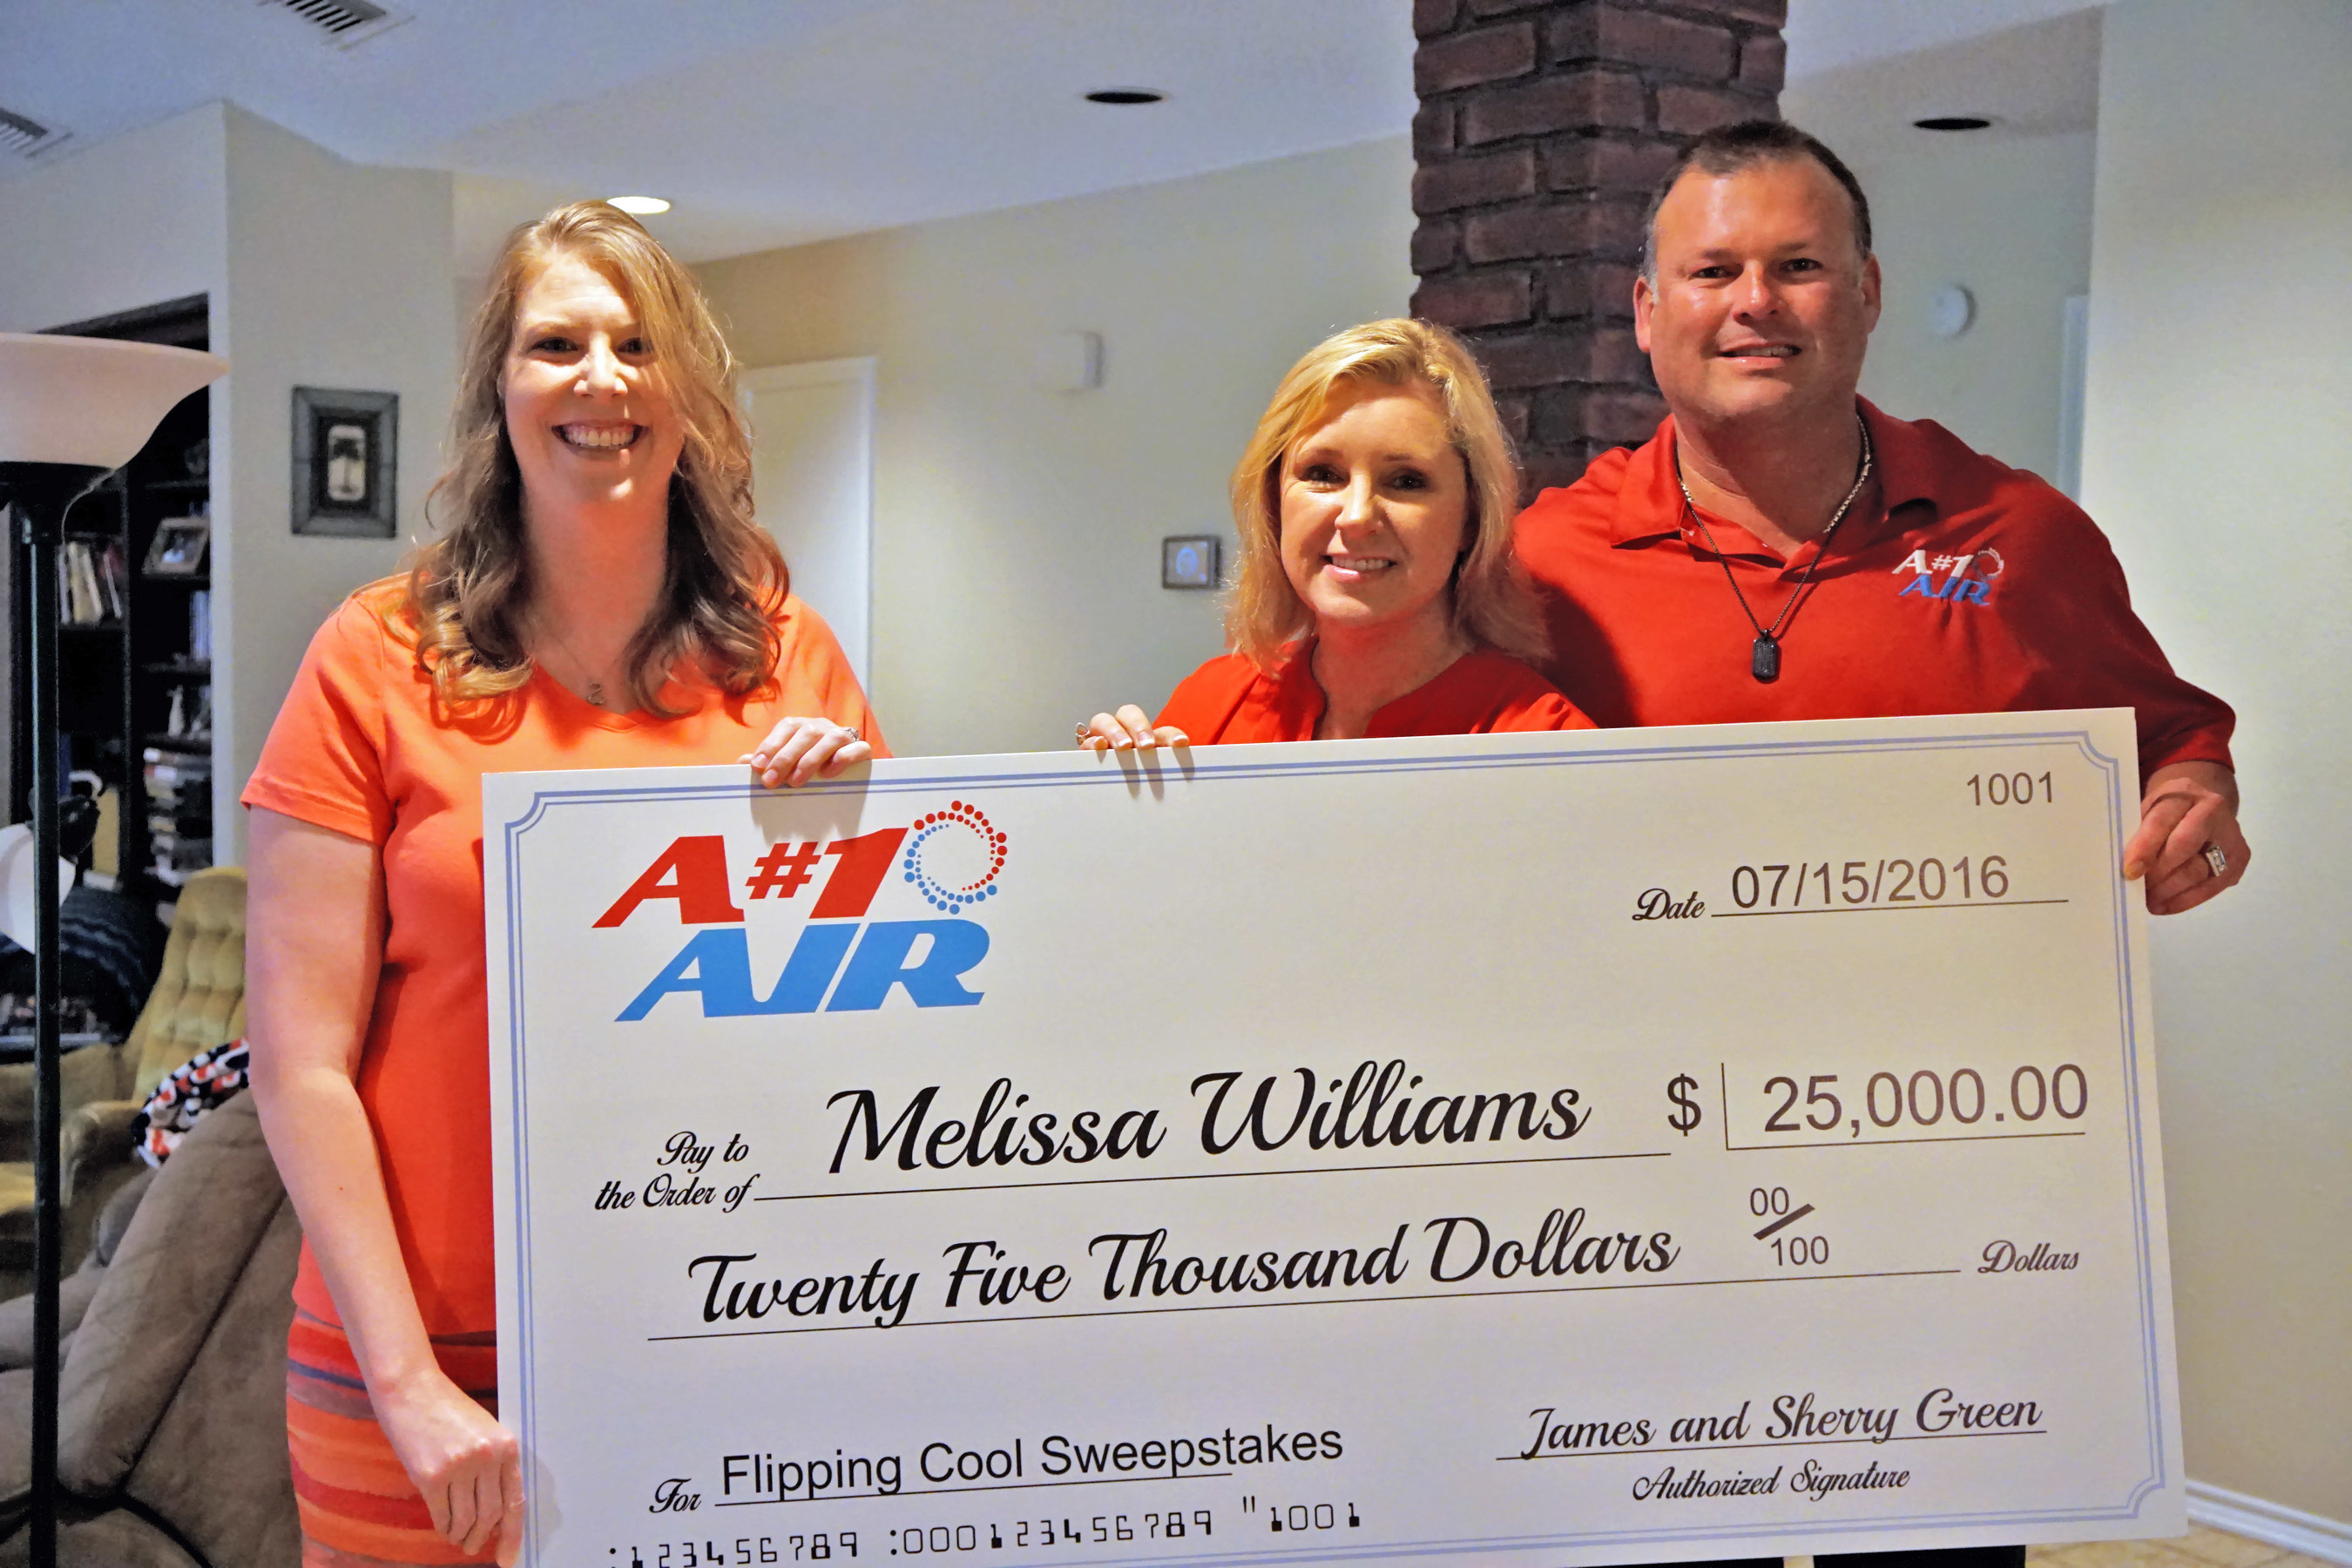 A#1 Air owners Sherry and James Green present Melissa Williams, winner of the A#1 Air Flippin' Cool Sweepstakes, a $25,000 check. Other prizes she won include a top-of-the-line Lennox 25 SEER Signature Series a/c system, iComfort smart thermostat, tankless water heater, duct cleaning and more. The Flippin' Cool Sweepstakes were sponsored by A#1 Air, Richard Rawlings of the Discovery show "Fast N' Loud" and Lennox. The new a/c system came just in time, as Melissa's was about to go out completely.